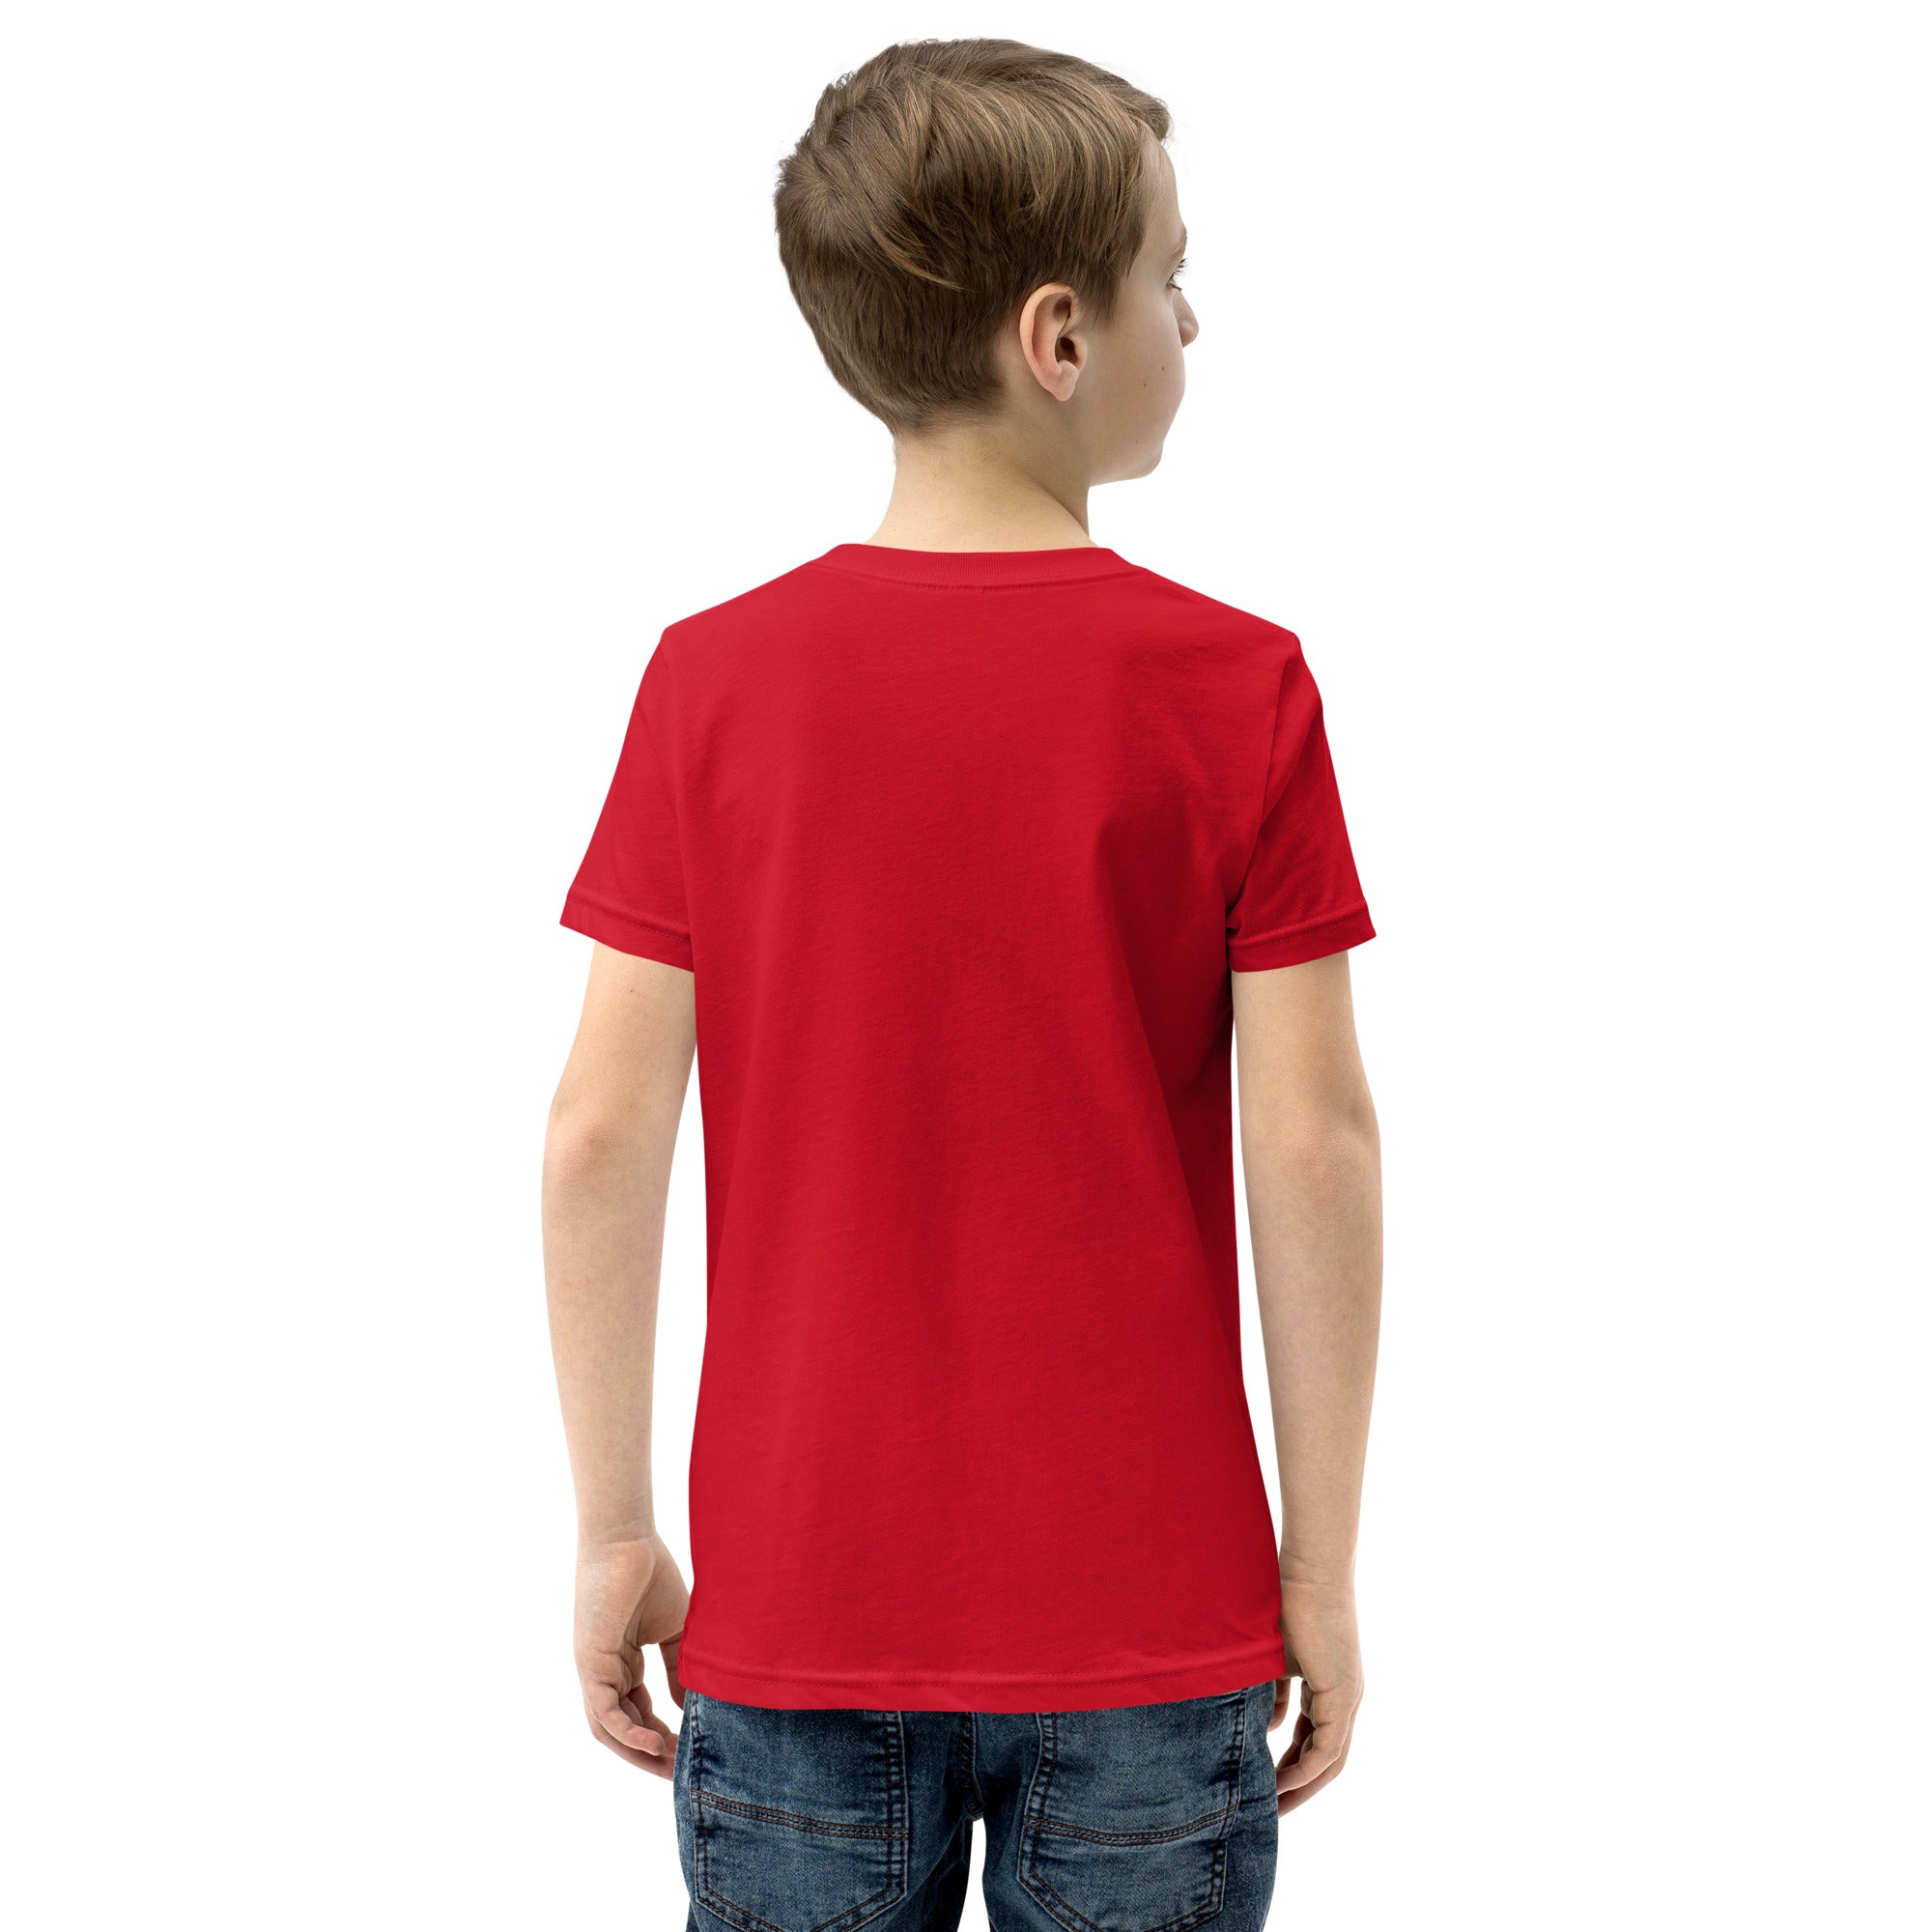 FH Logo W - Red Youth Short Sleeve T-Shirt